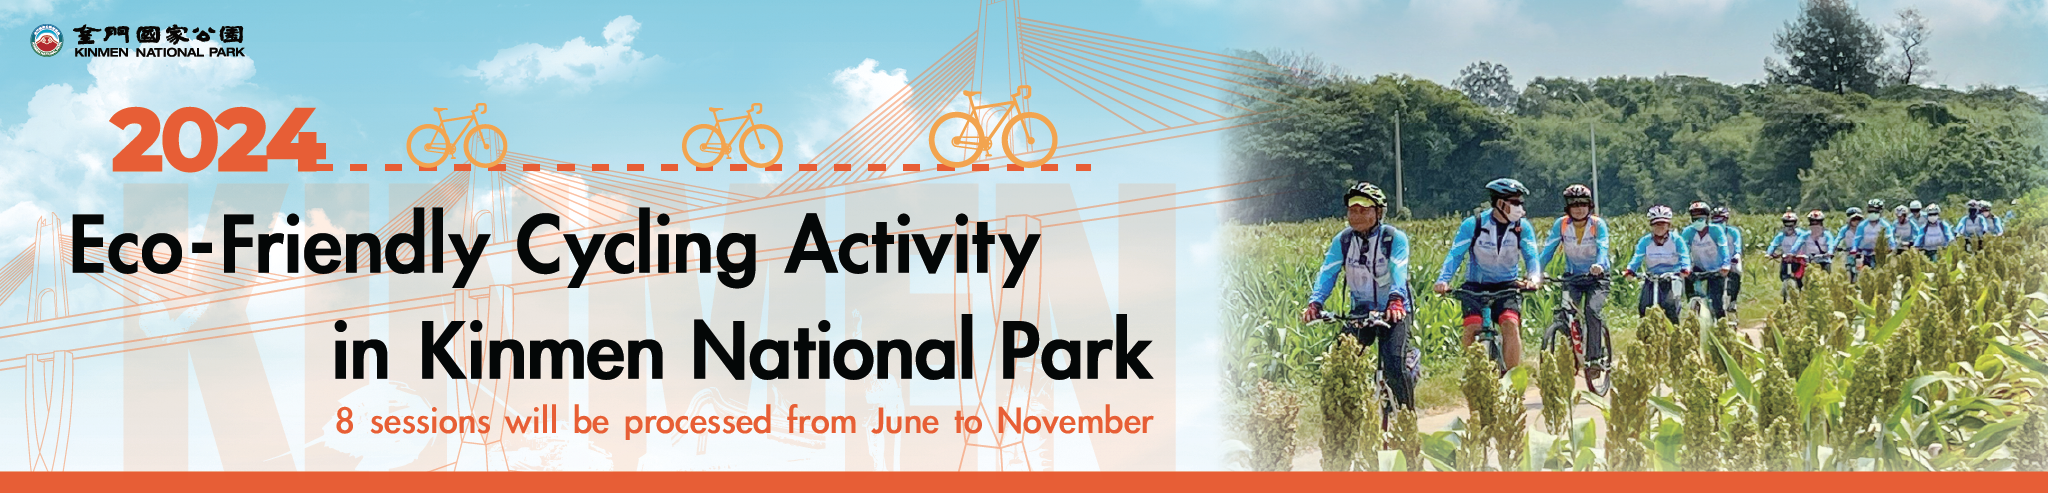 Eco-Friendly Cycling Activity in Kinmen National Park